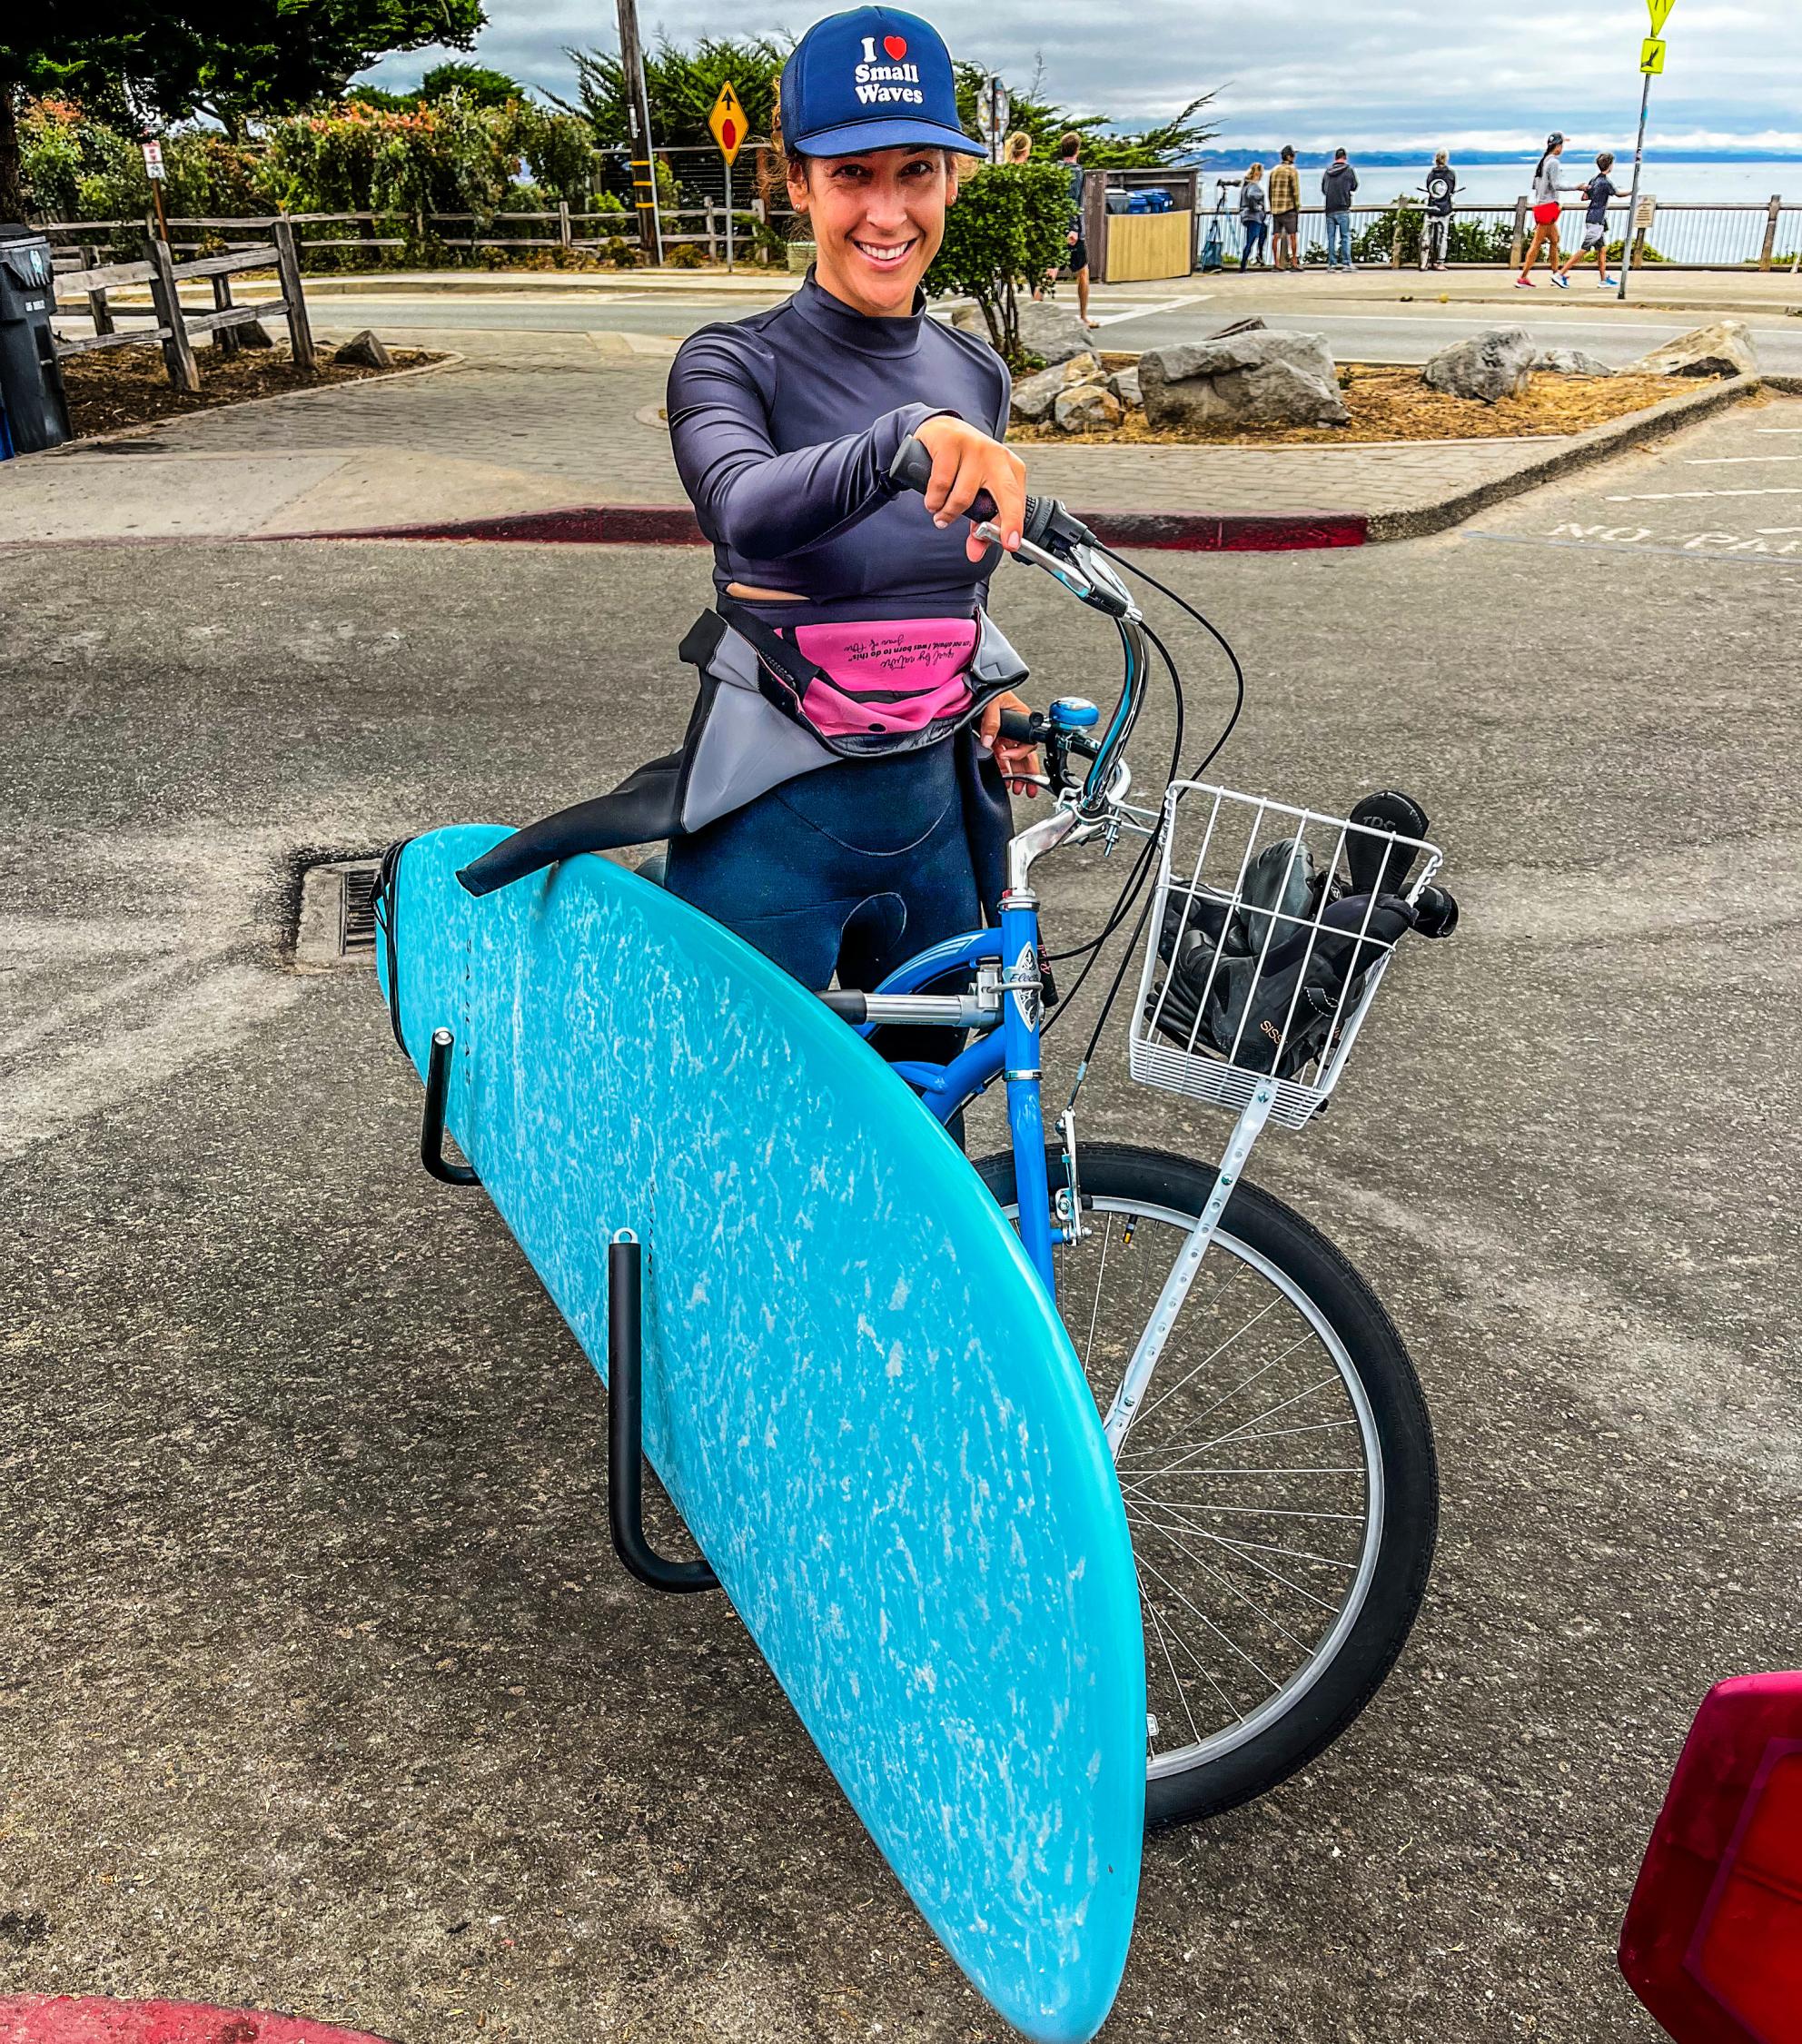 Suzanne next to bike with surfboard